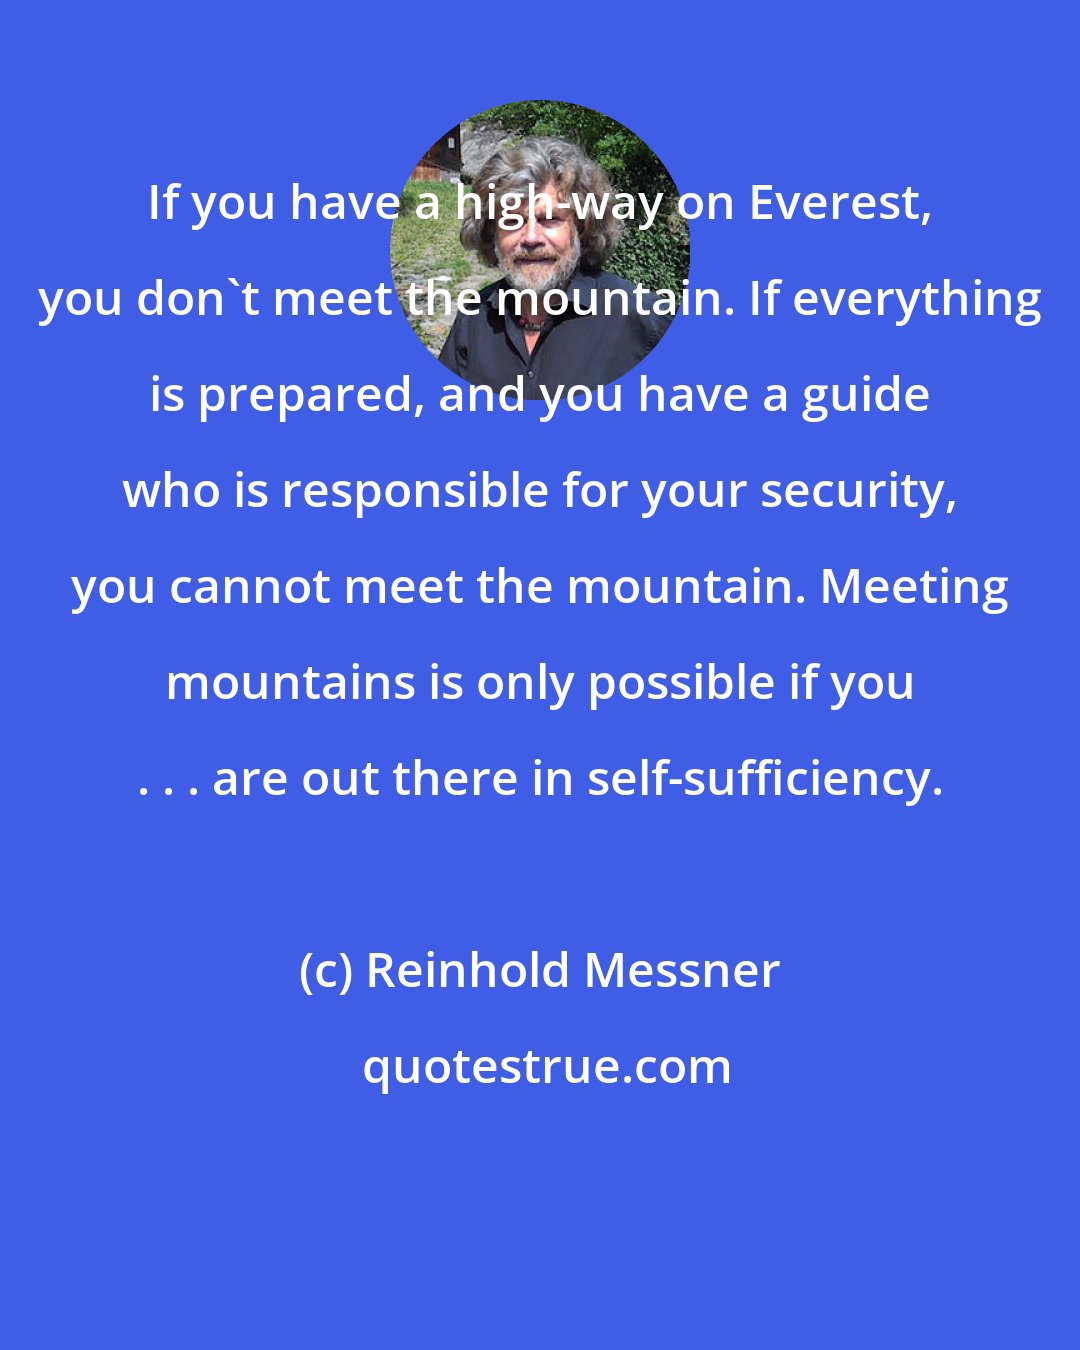 Reinhold Messner: If you have a high-way on Everest, you don't meet the mountain. If everything is prepared, and you have a guide who is responsible for your security, you cannot meet the mountain. Meeting mountains is only possible if you . . . are out there in self-sufﬁciency.